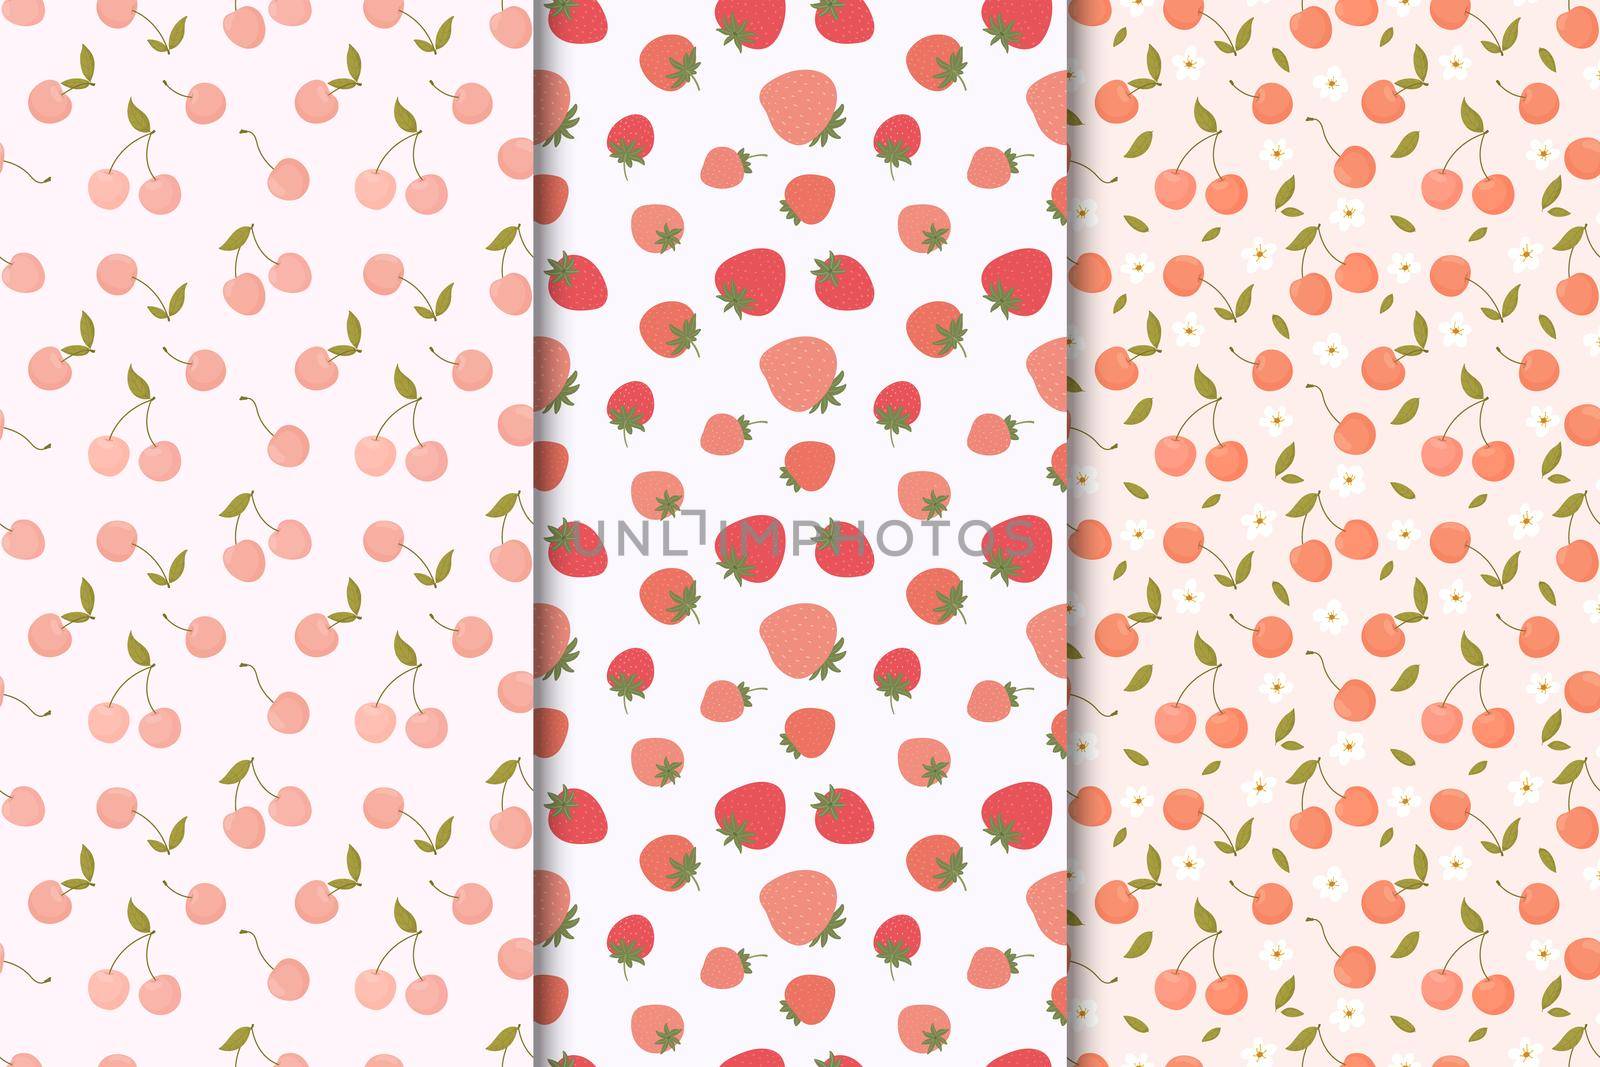 Set of seamless patterns with summer fruits. cherries, strawberries, flowers and leaves on a white and light pink background. by Lena_Khmelniuk